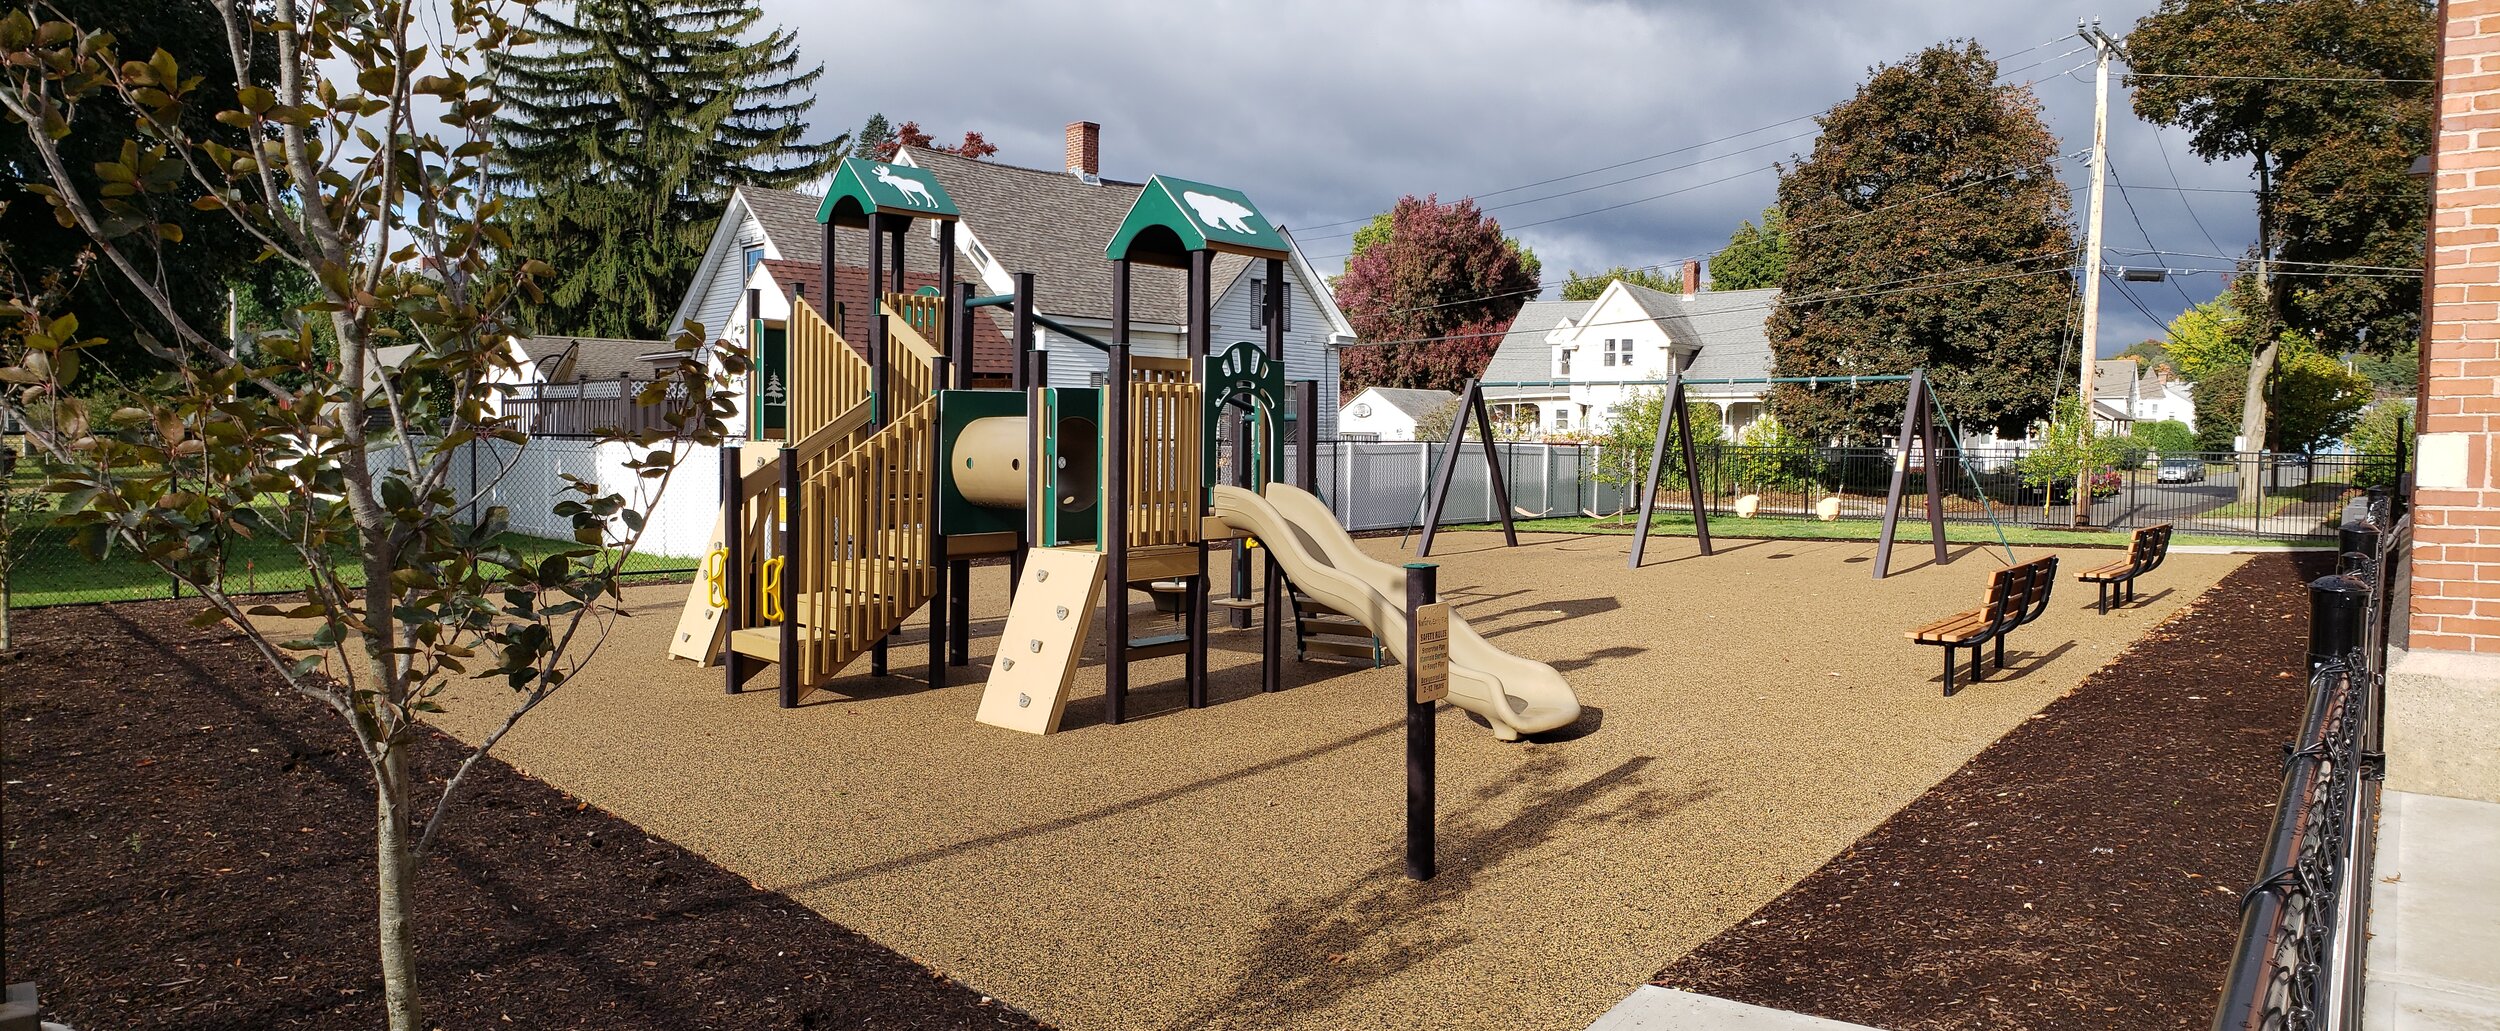 Mosely Street Apartments Playground 6.jpg